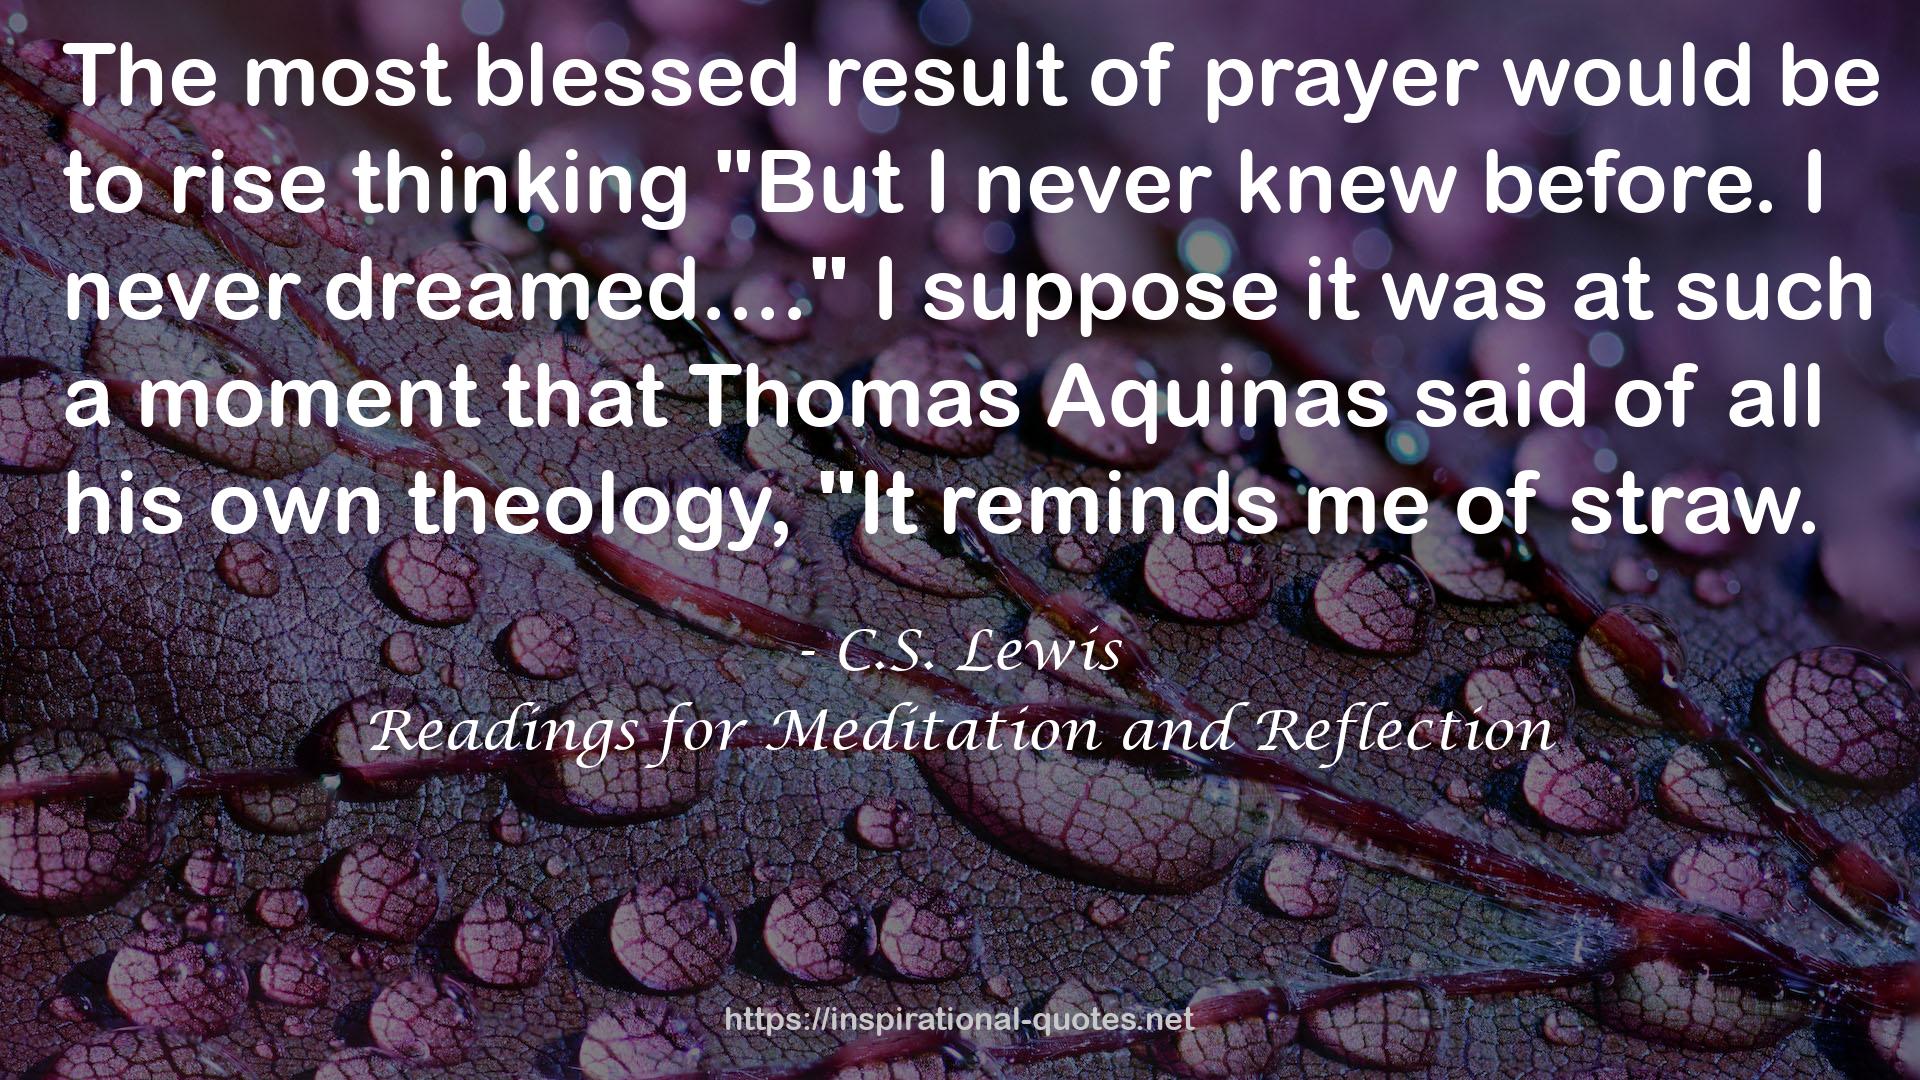 Readings for Meditation and Reflection QUOTES